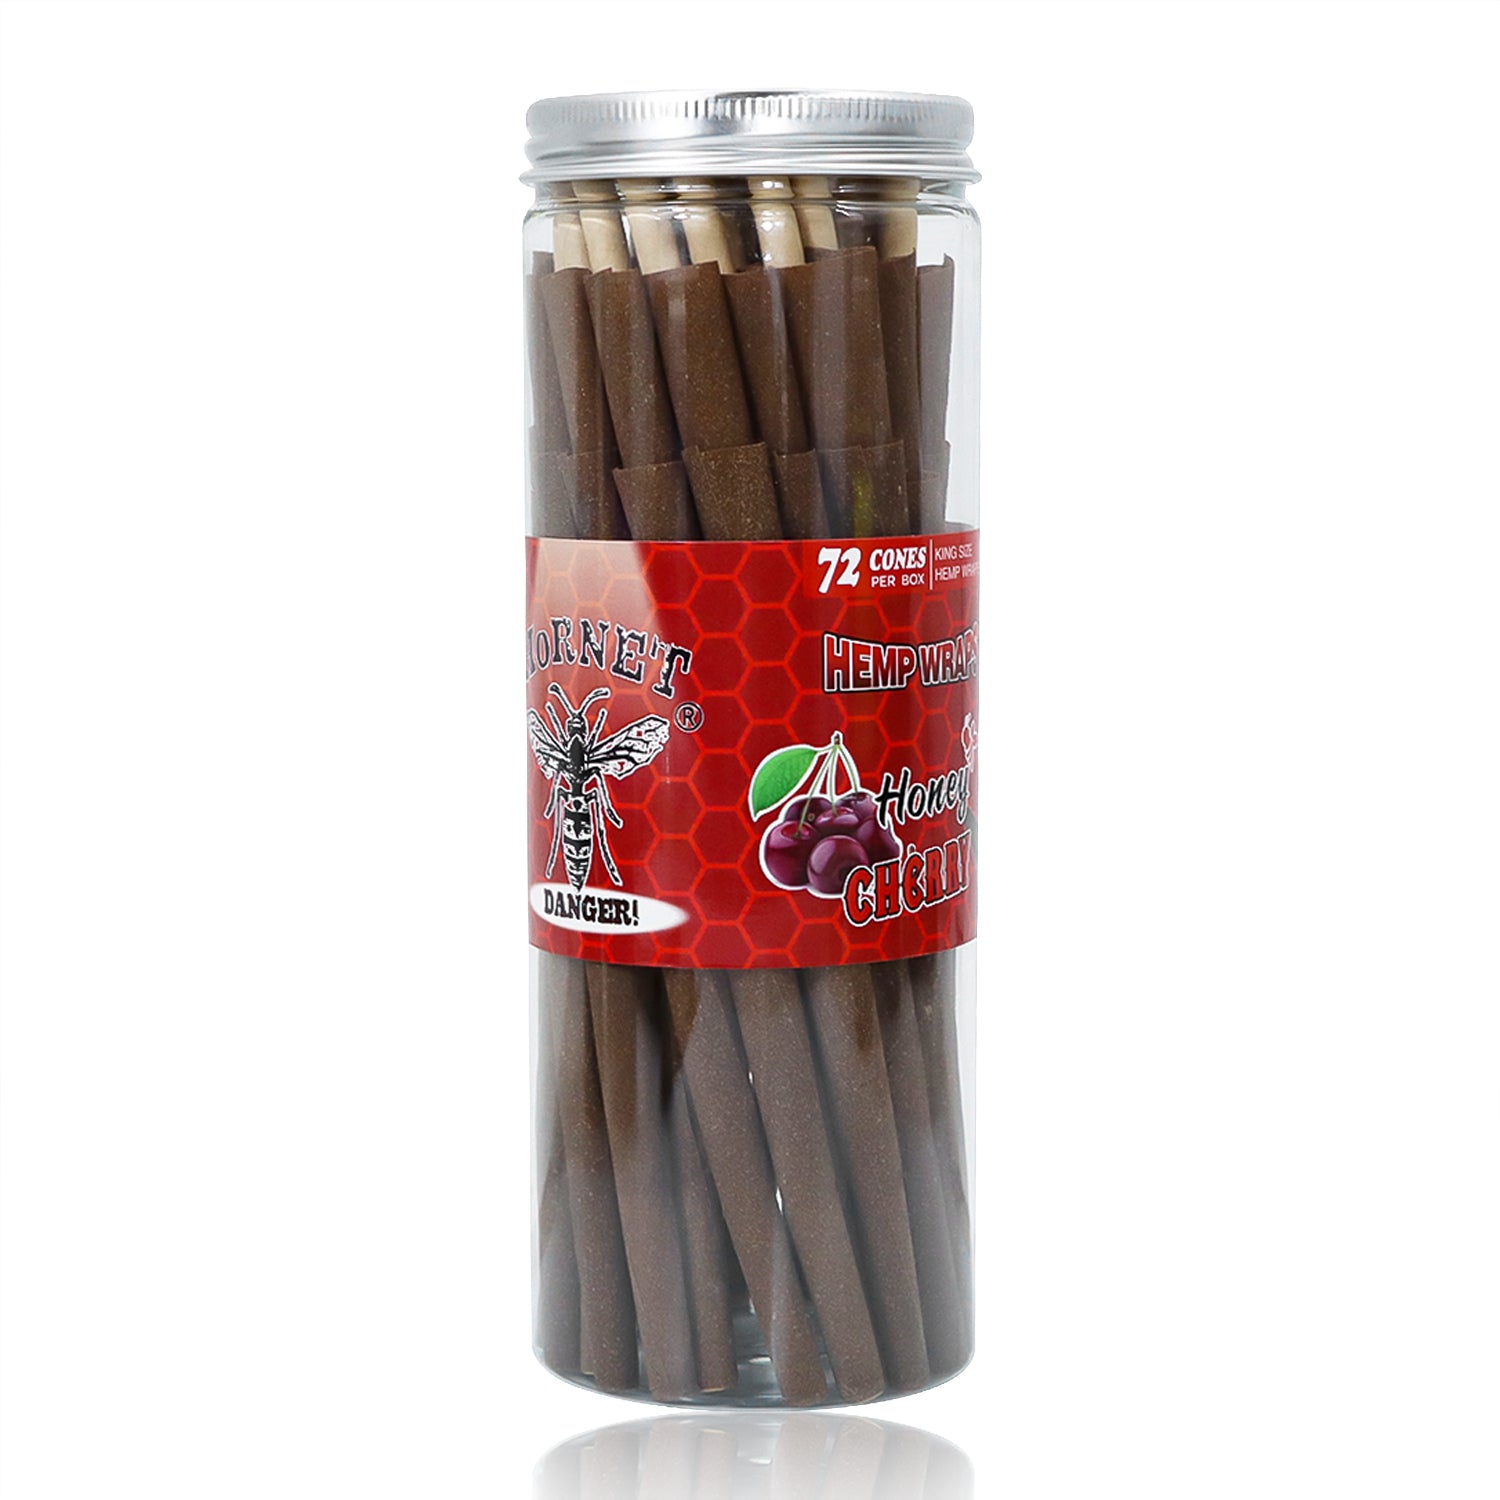 HORNET Cherry Flavored Brown Pre Rolled Cones, King Size Pre Rolled Rolling Paper with tips, Slow Burning Rolling Cones & load, 72 PCS / Jar